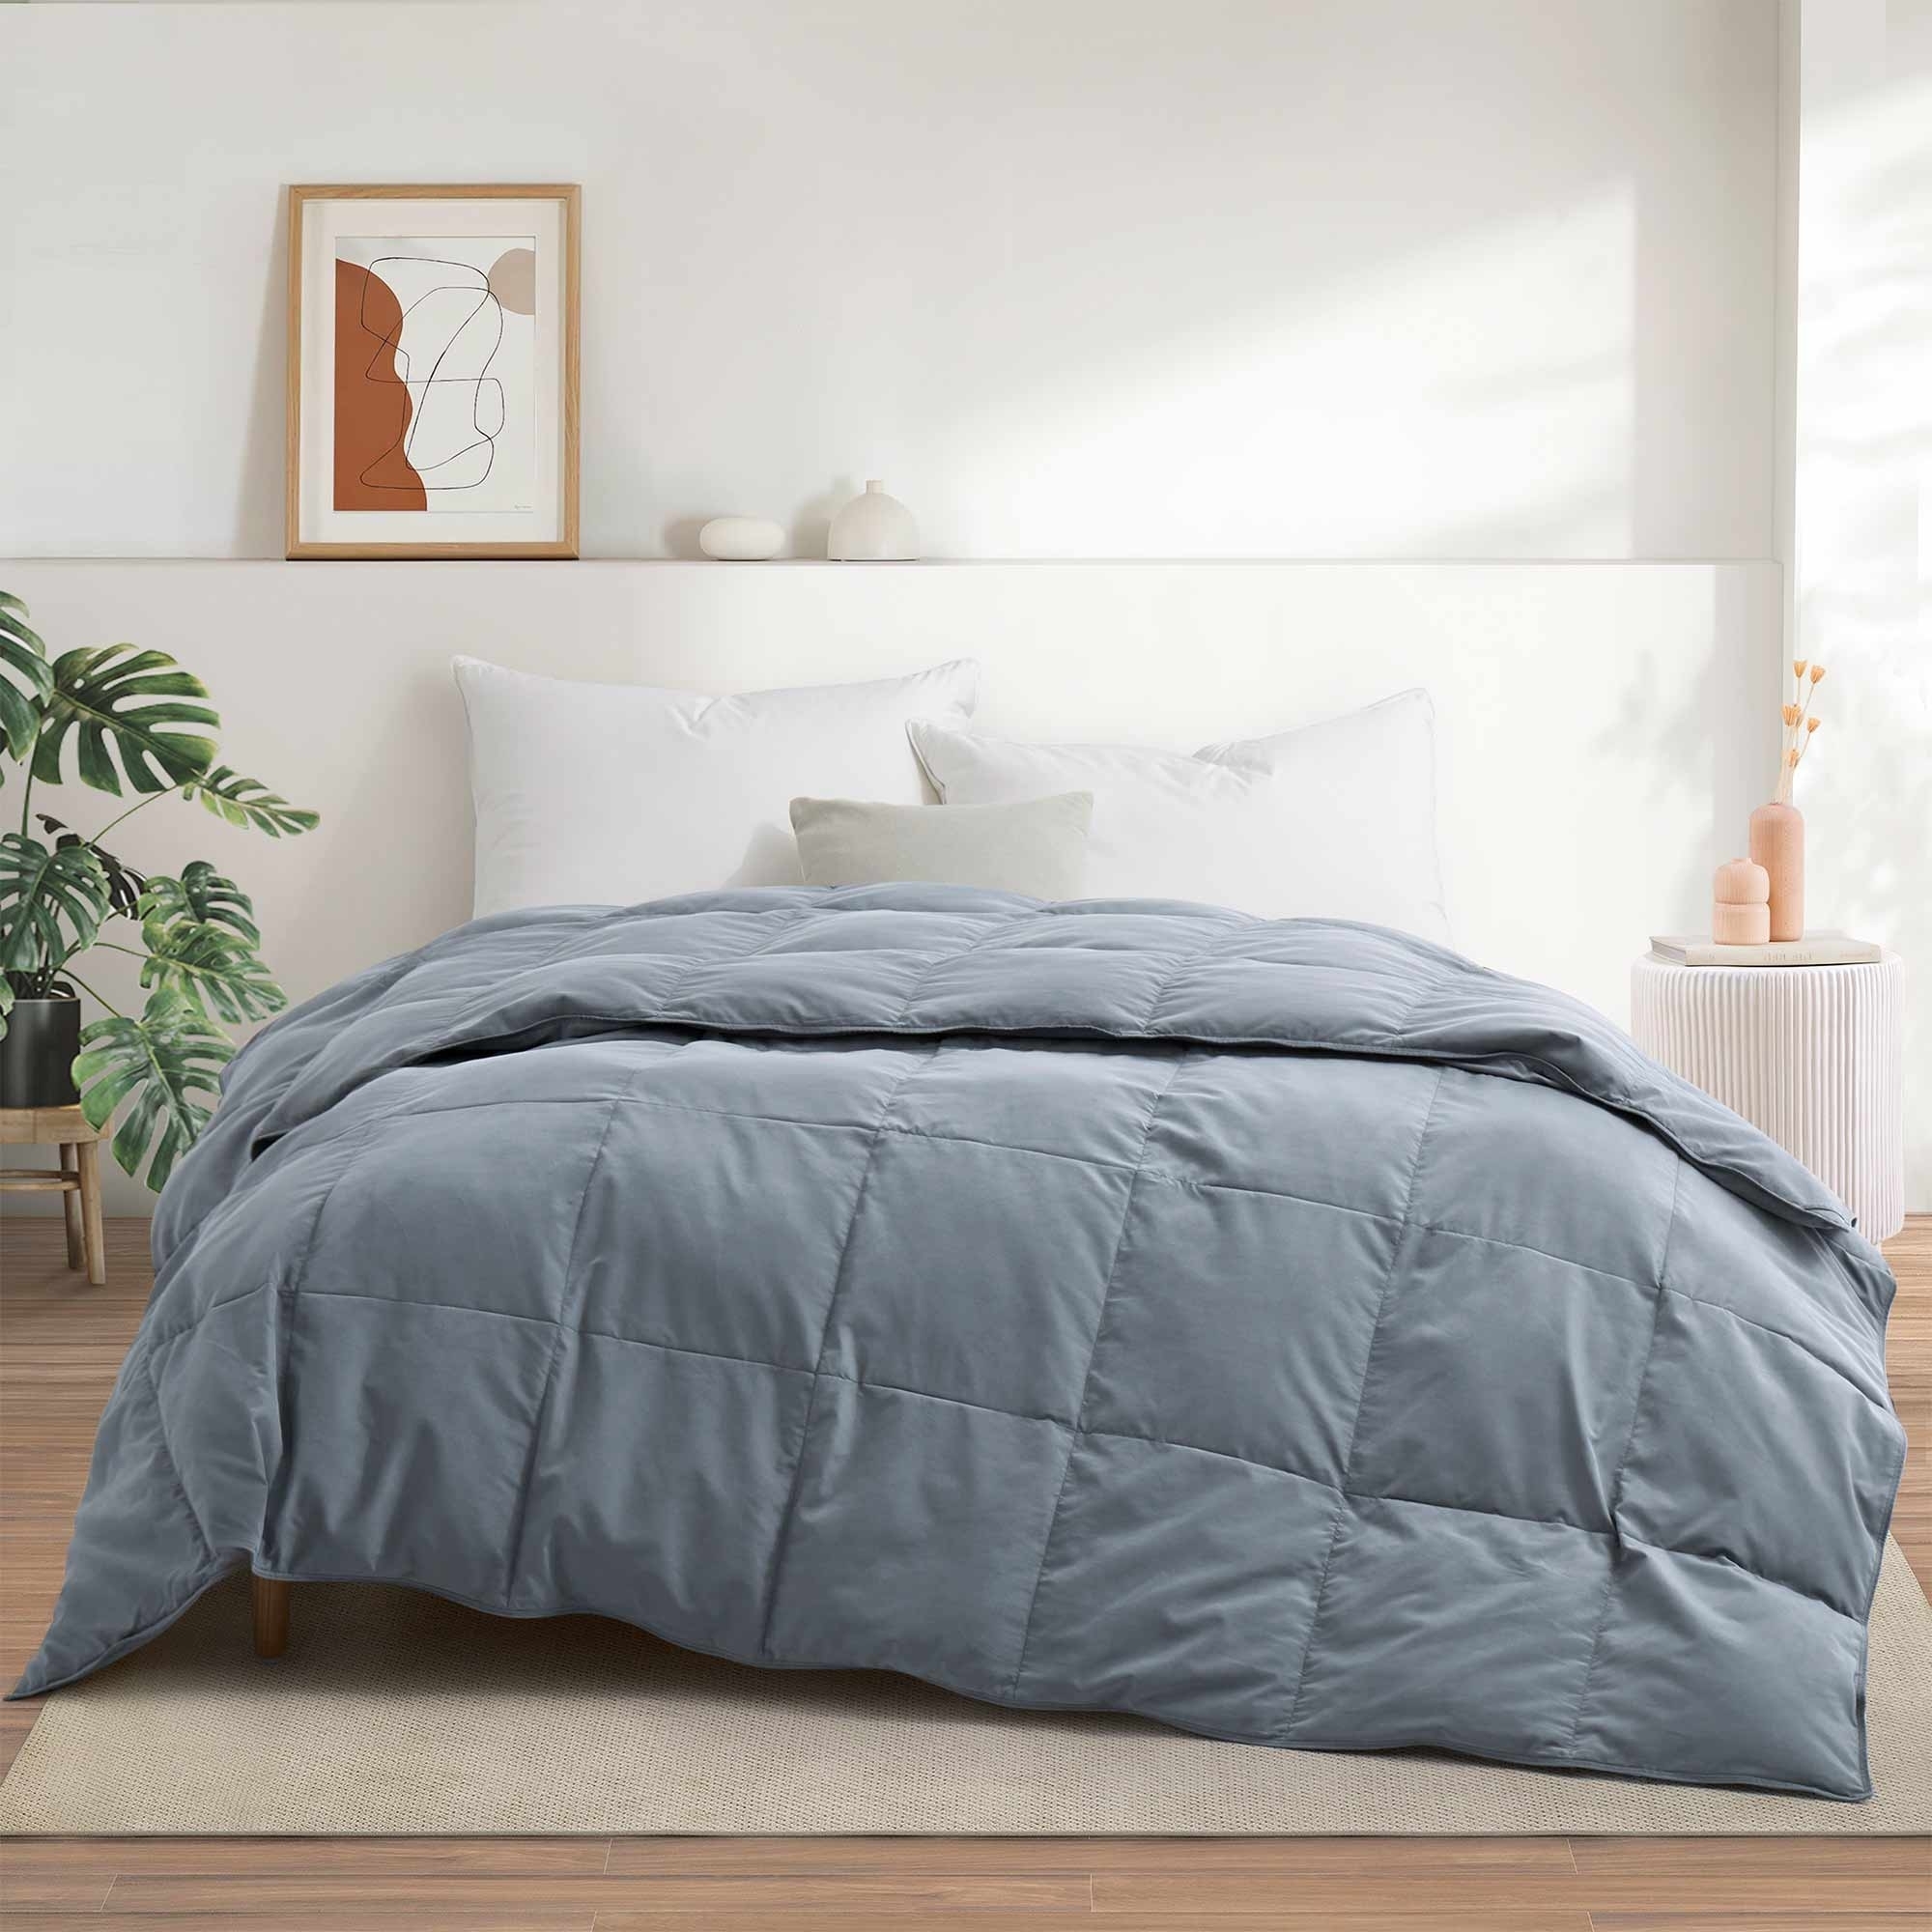 Lightweight Goose Feather And Down Comforter- Hotel Collection For Hot Sleepers - Steel Gray, Full